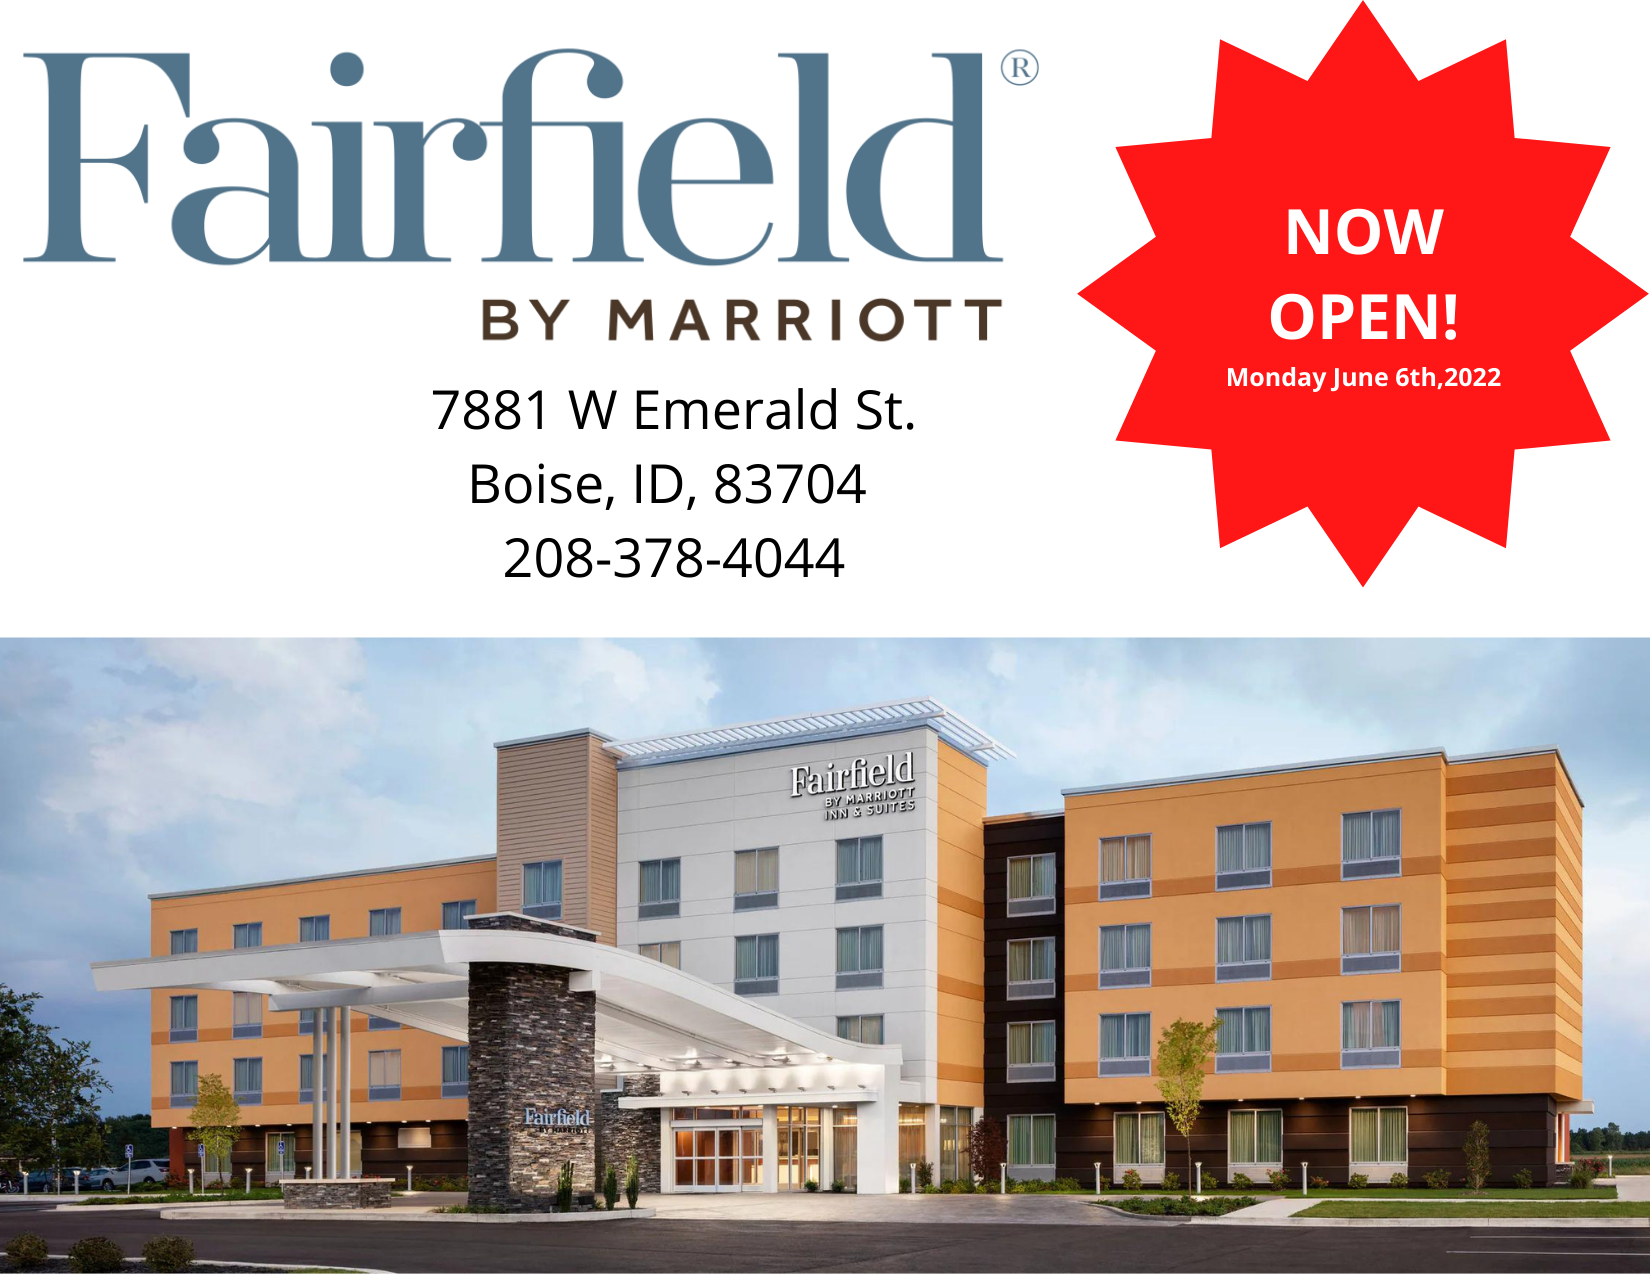 We welcome the Fairfield Inn & Suites Boise West! from Mall Management